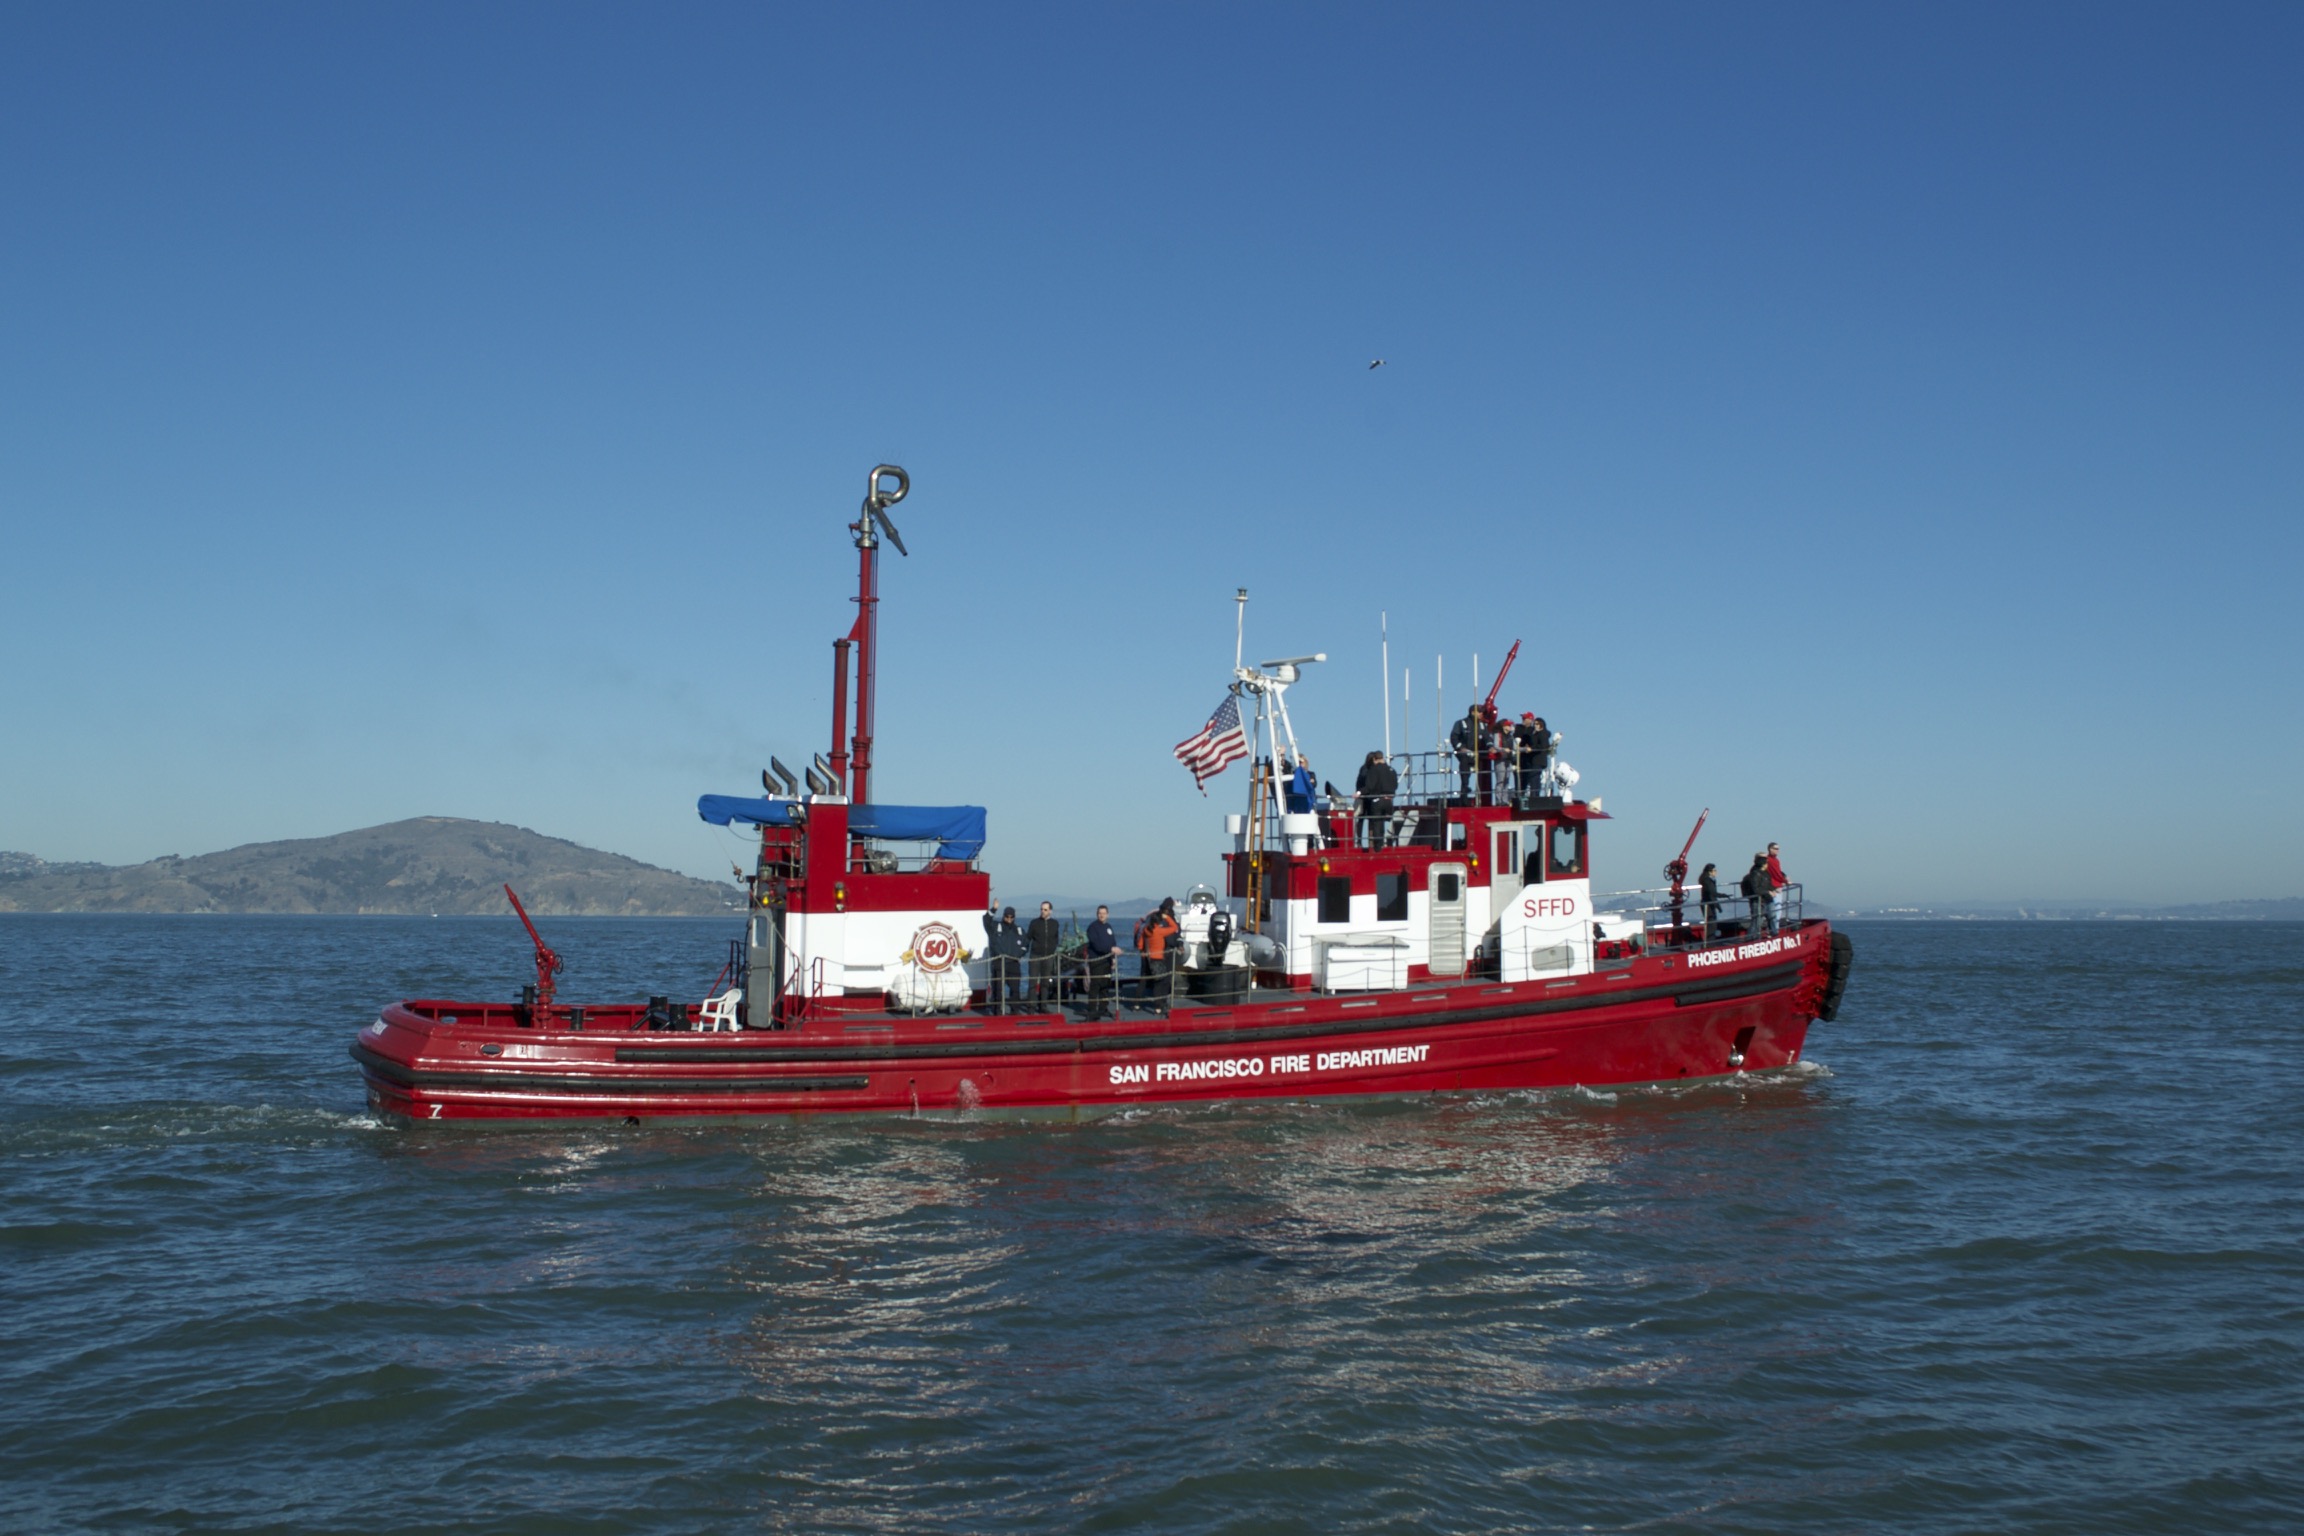 A red San Francisco Fire Department boat.